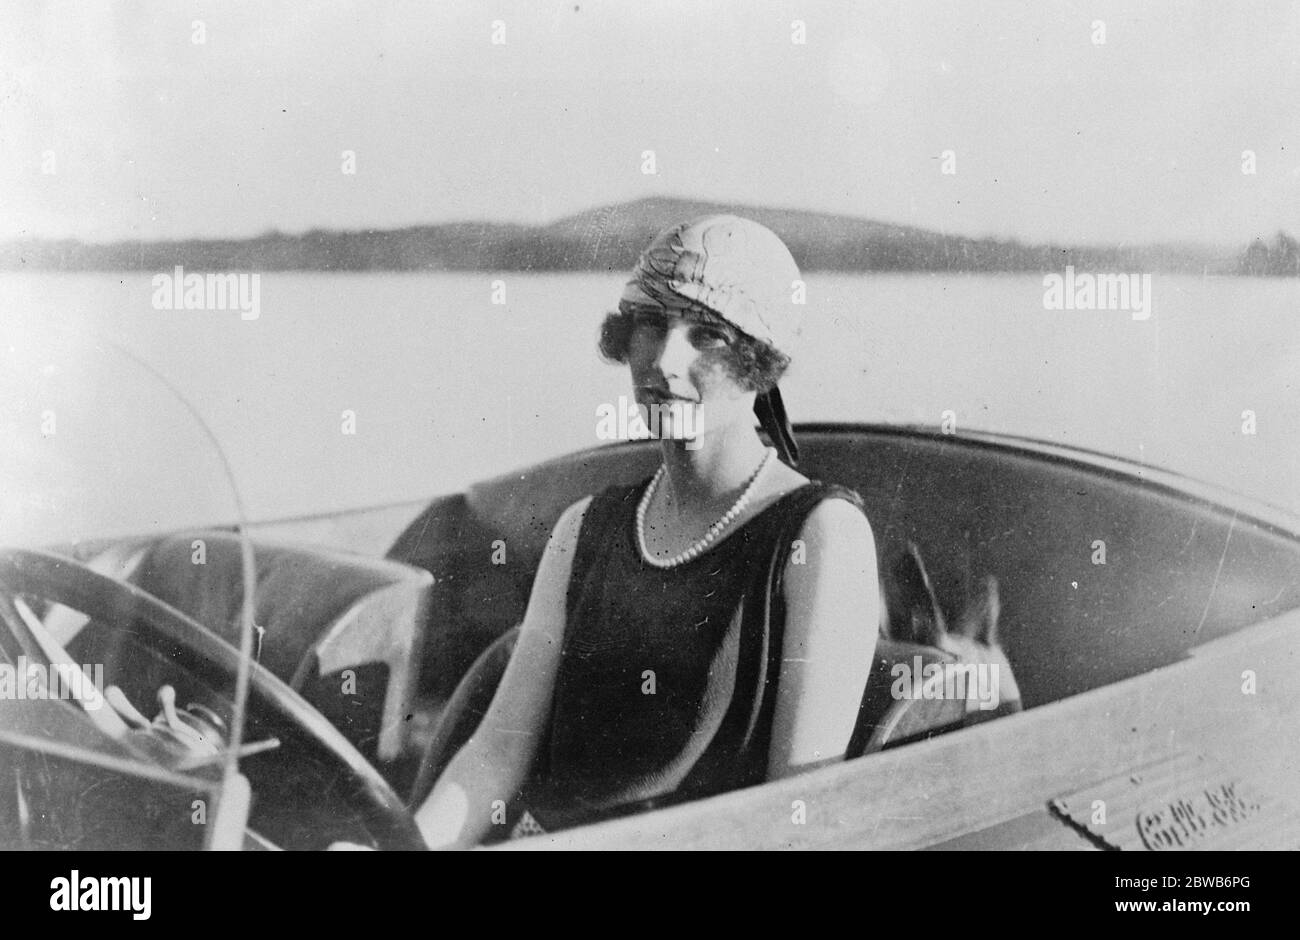 Narrow escape for Princess Xenia in burning motor boat . Mrs W B Leeds ( Princess Xenia of Russia ) photographed a few days after her narrow escape on her husband ' s motor boat on a lake near York . Fortunately , her husband was able to extinguish the flames before much damage was done . 19 September 1924 Stock Photo